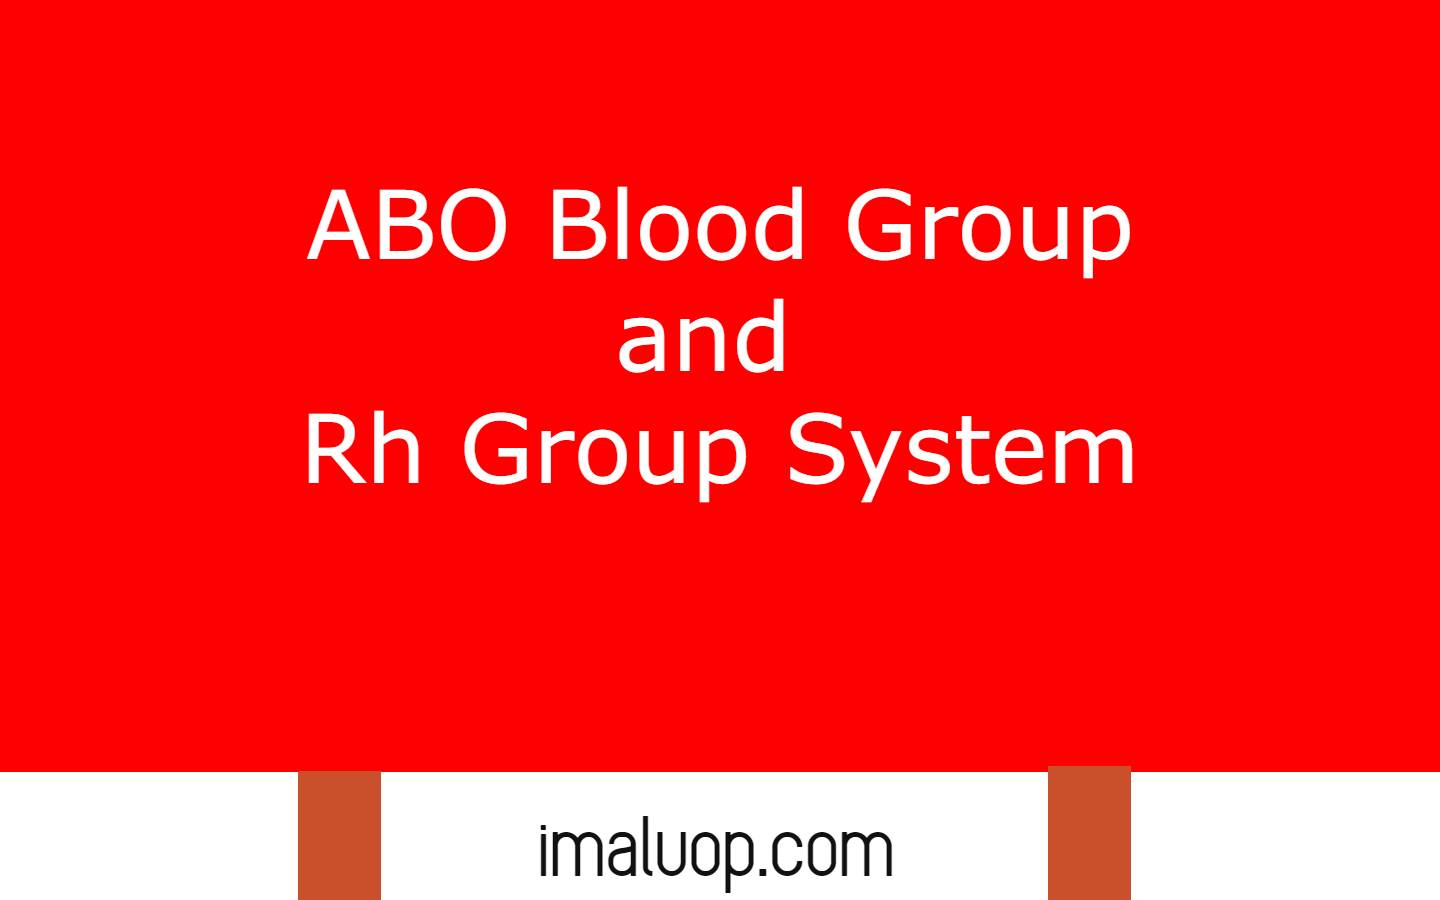 ABO Blood Group and Rh Group System